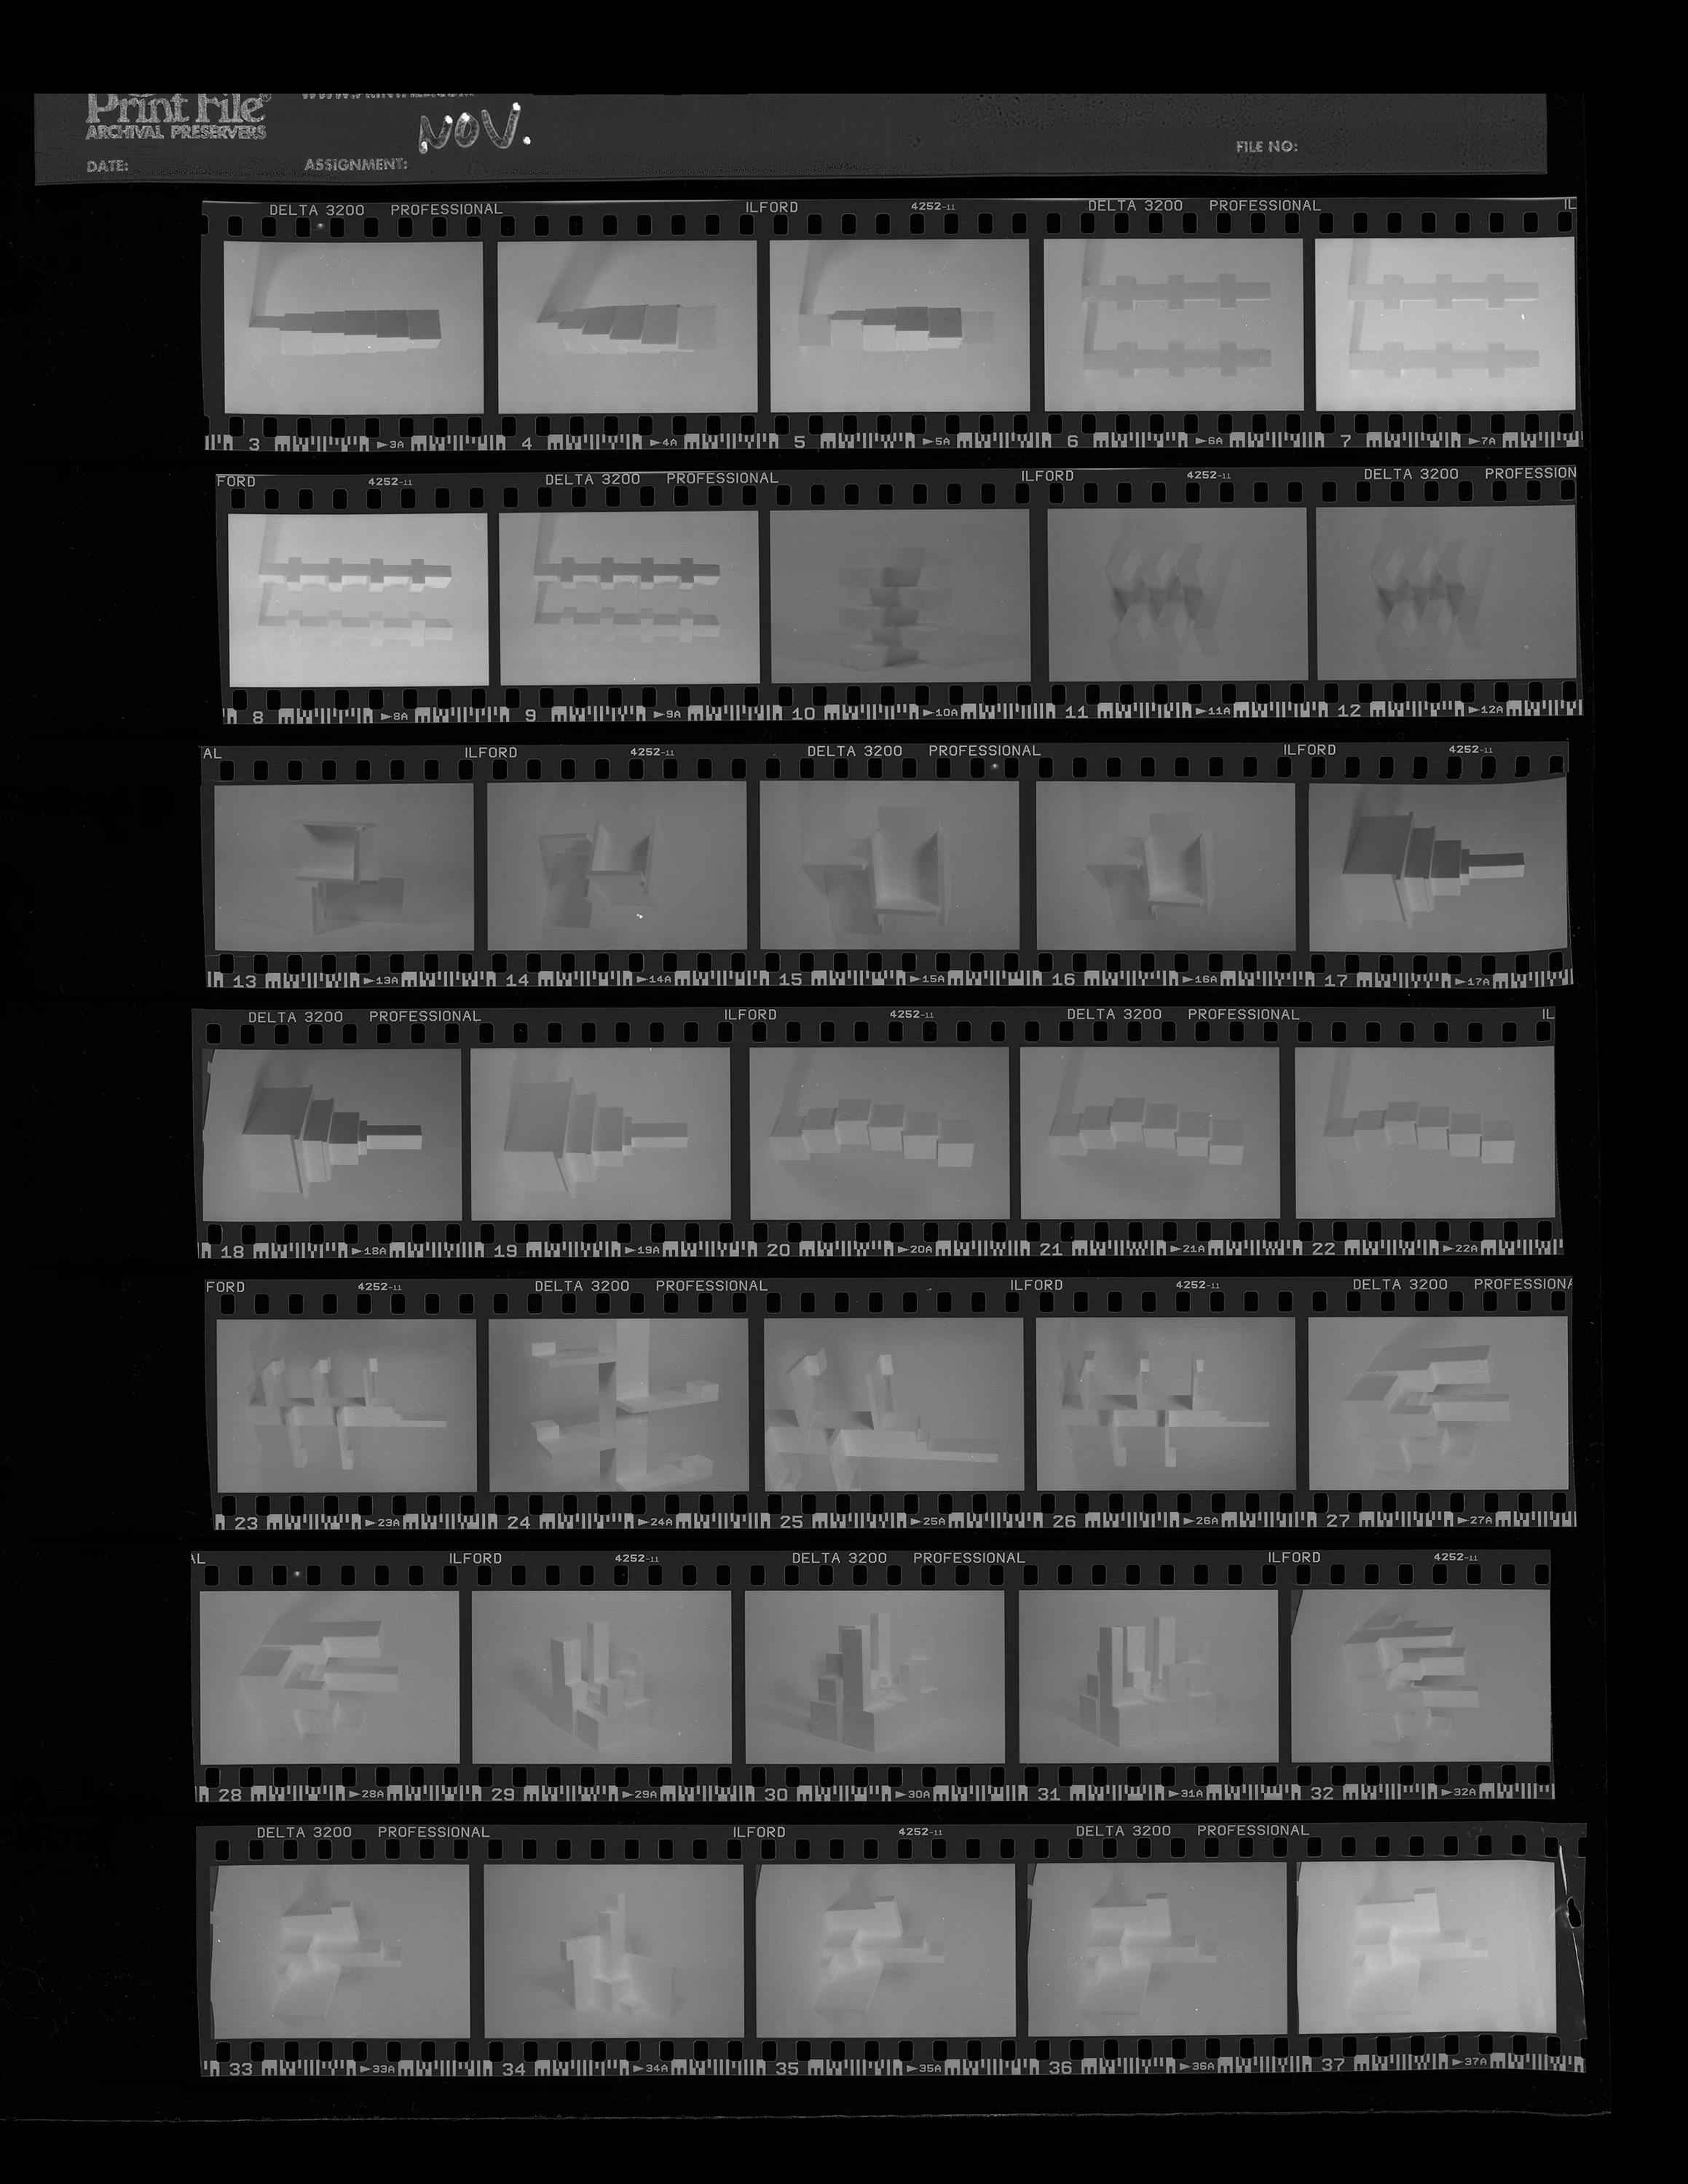 Contact sheet with individual black and white photos of styrofoam sculptures by artist Adam Ryder.